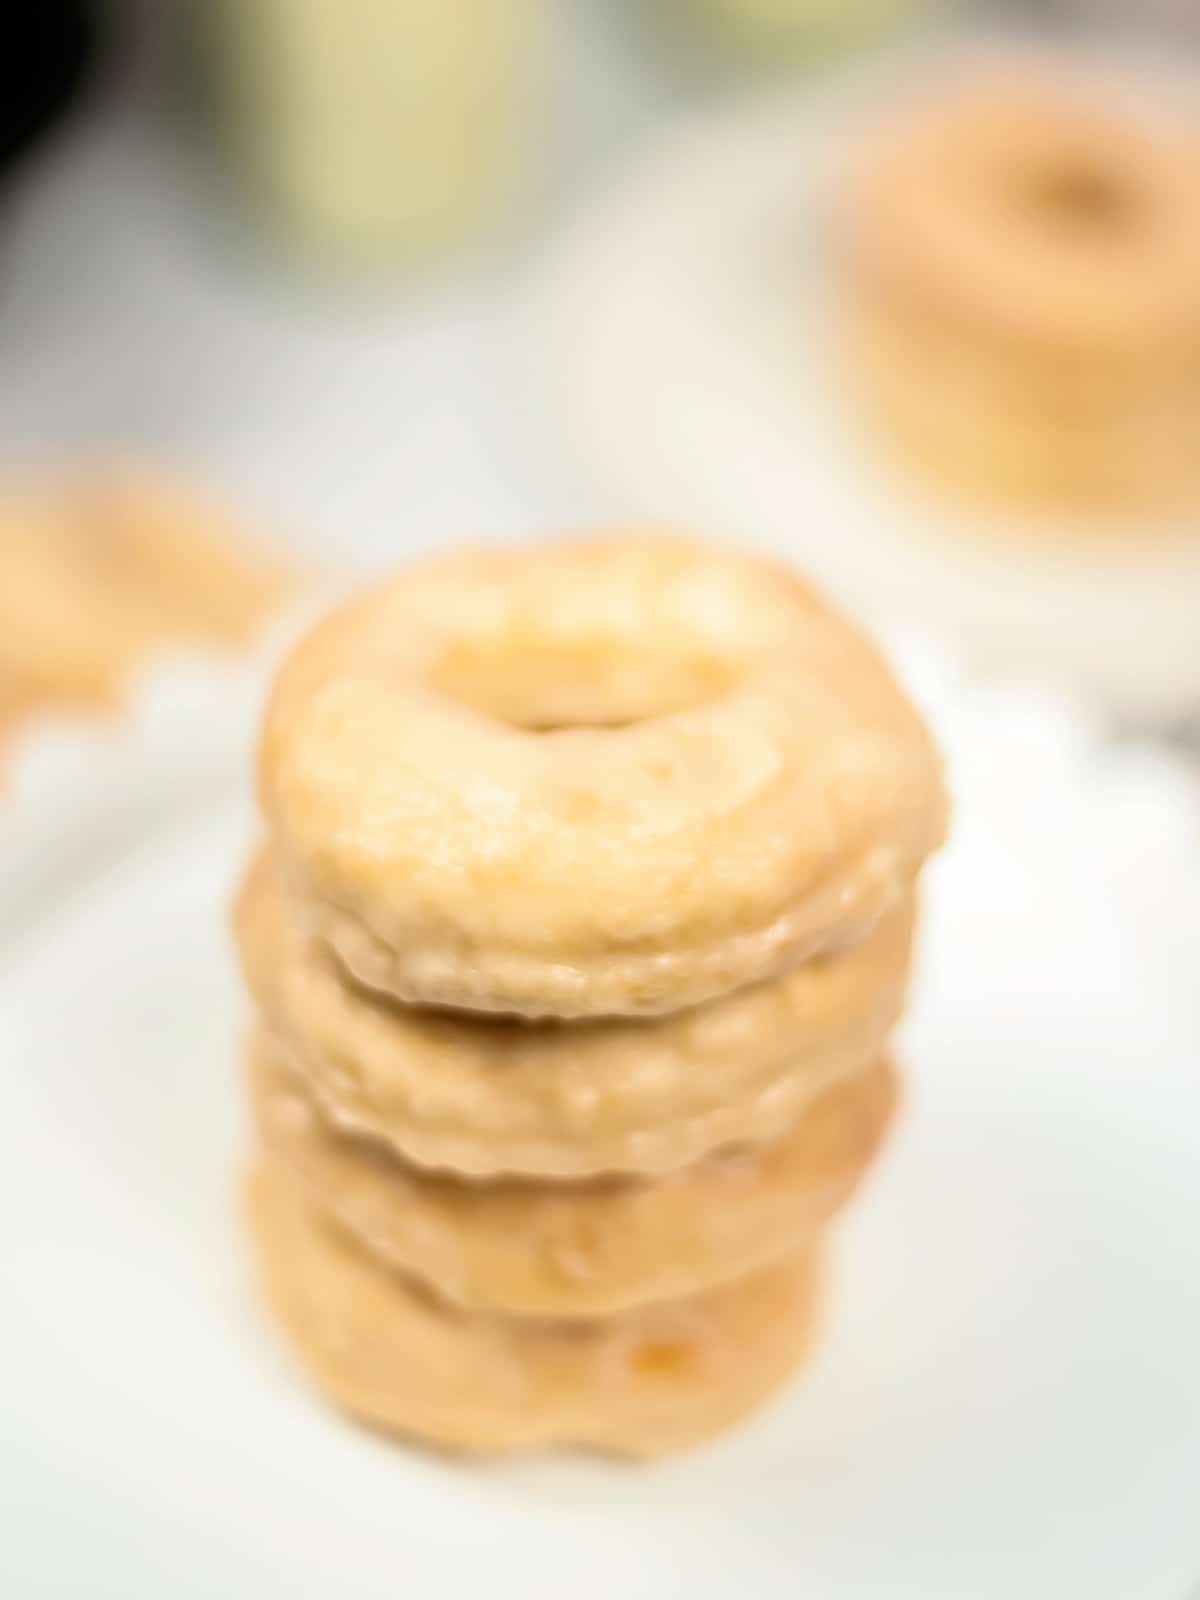 Air Fryer glazed donuts from biscuit dough